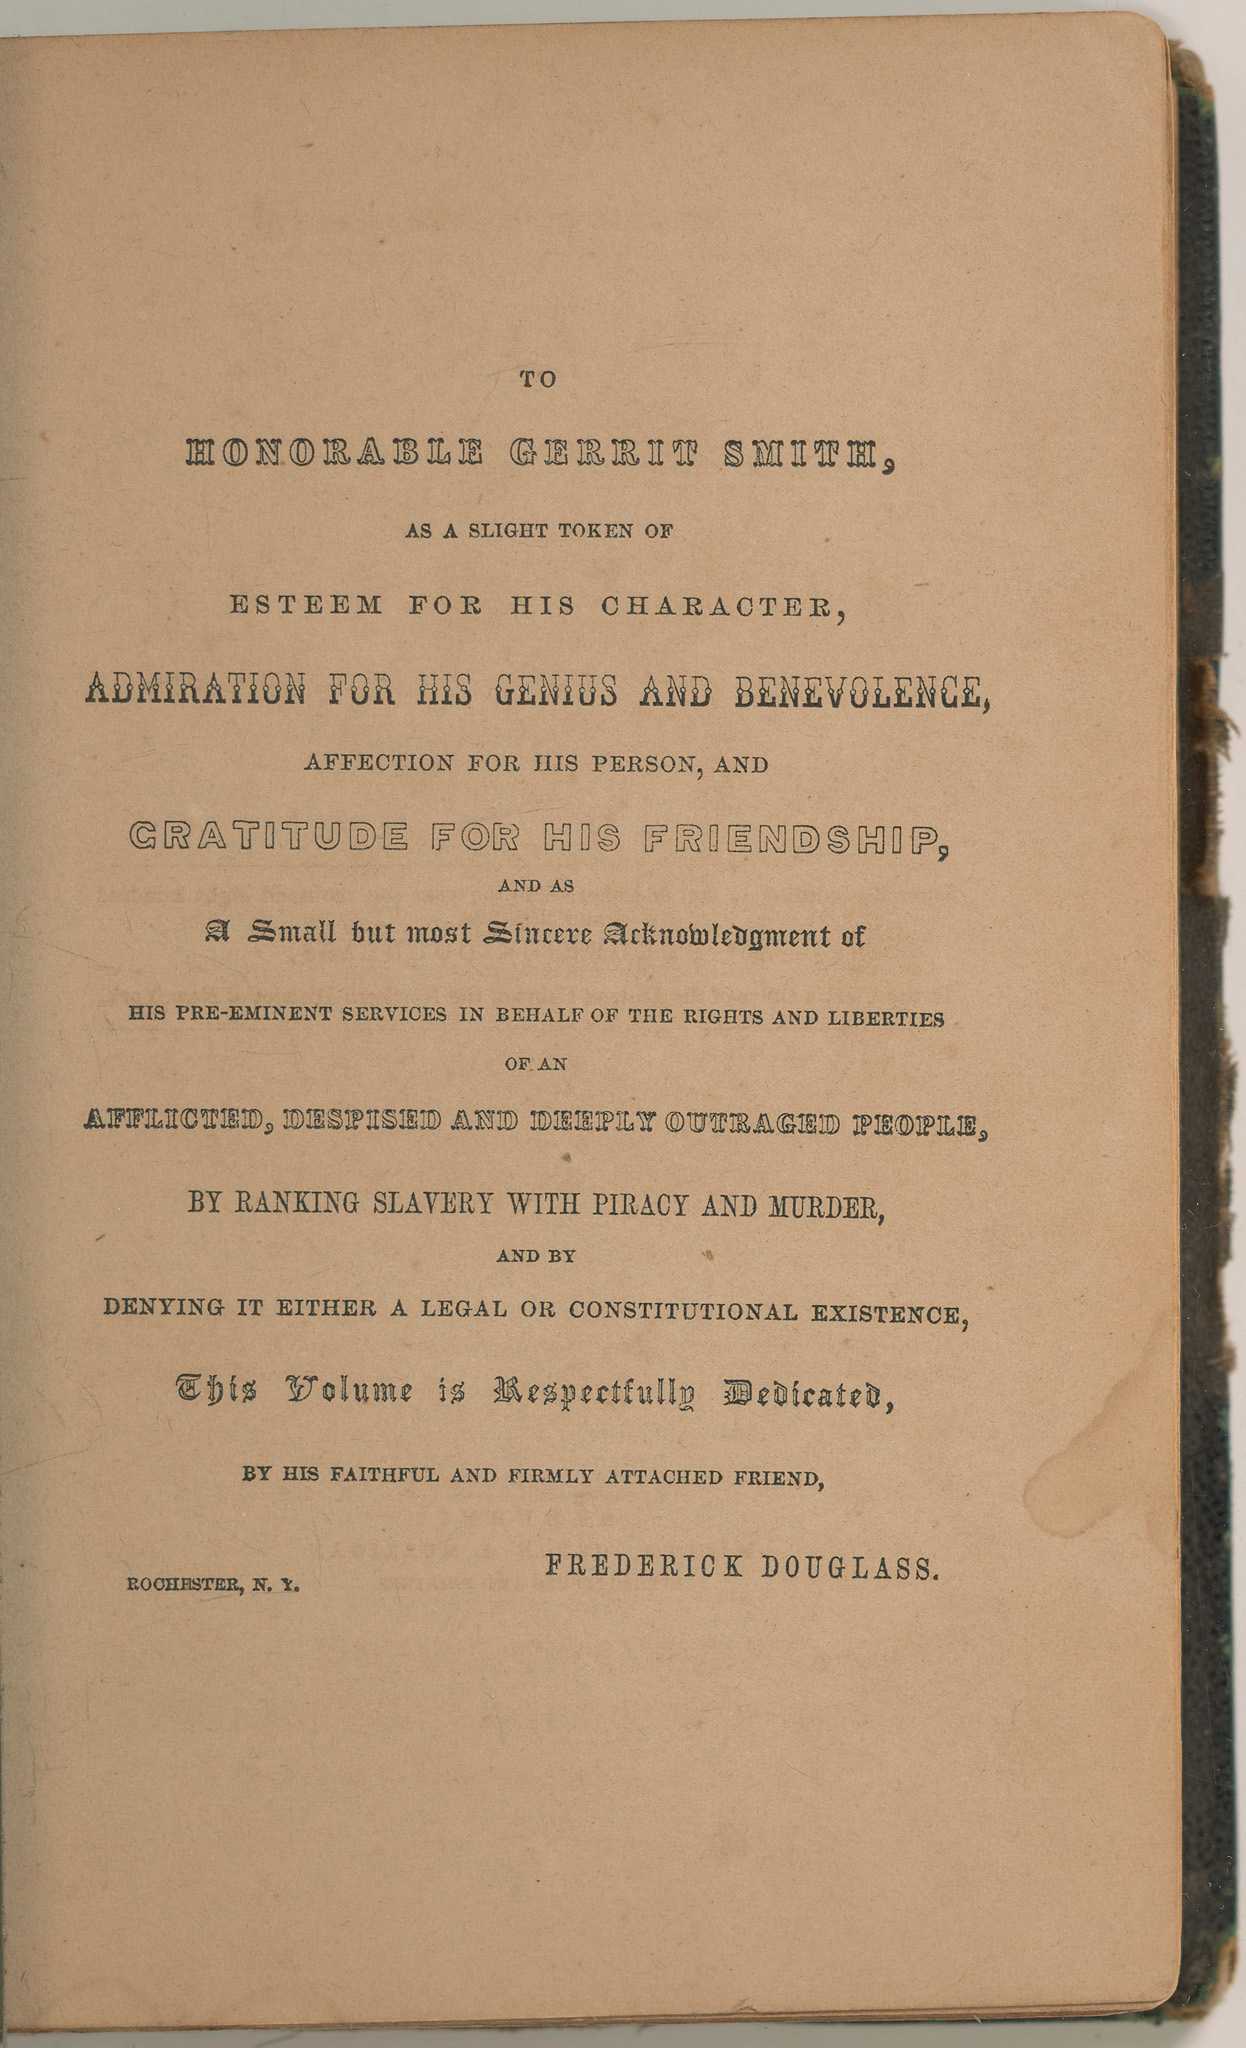 Hardcover book entitled "My Bondage and My Freedom" with an illustration of Frederick Douglass as frontispiece. This slave narrative is dedicated to Gerrit Smith.